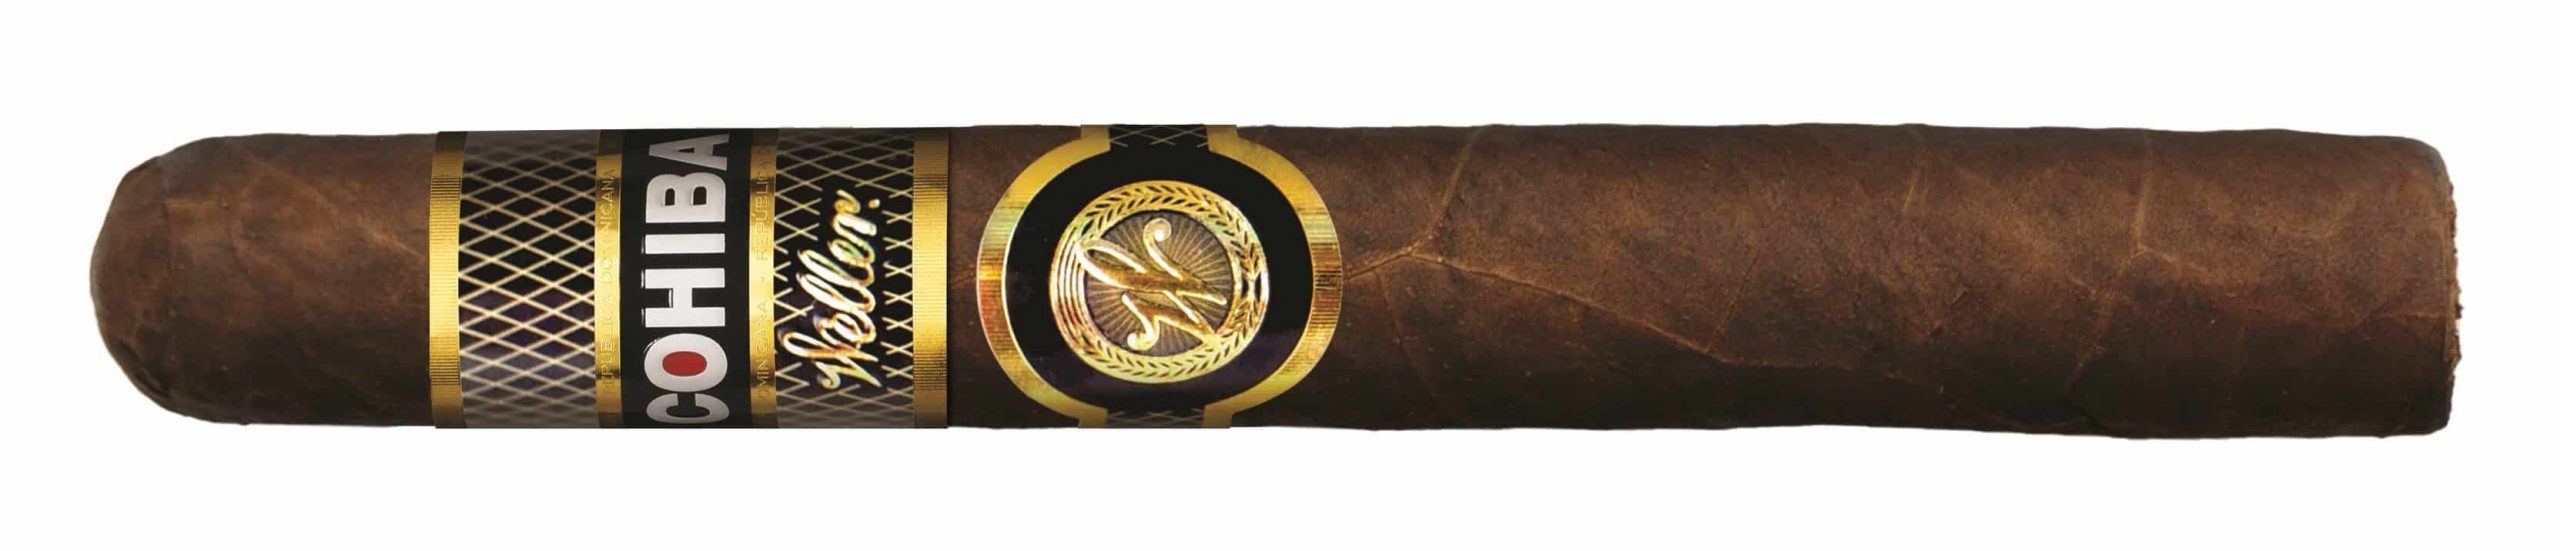 cohiba-launches-new-weller-by-cohiba-with-bourbon-aged-binder-–-cigar-news